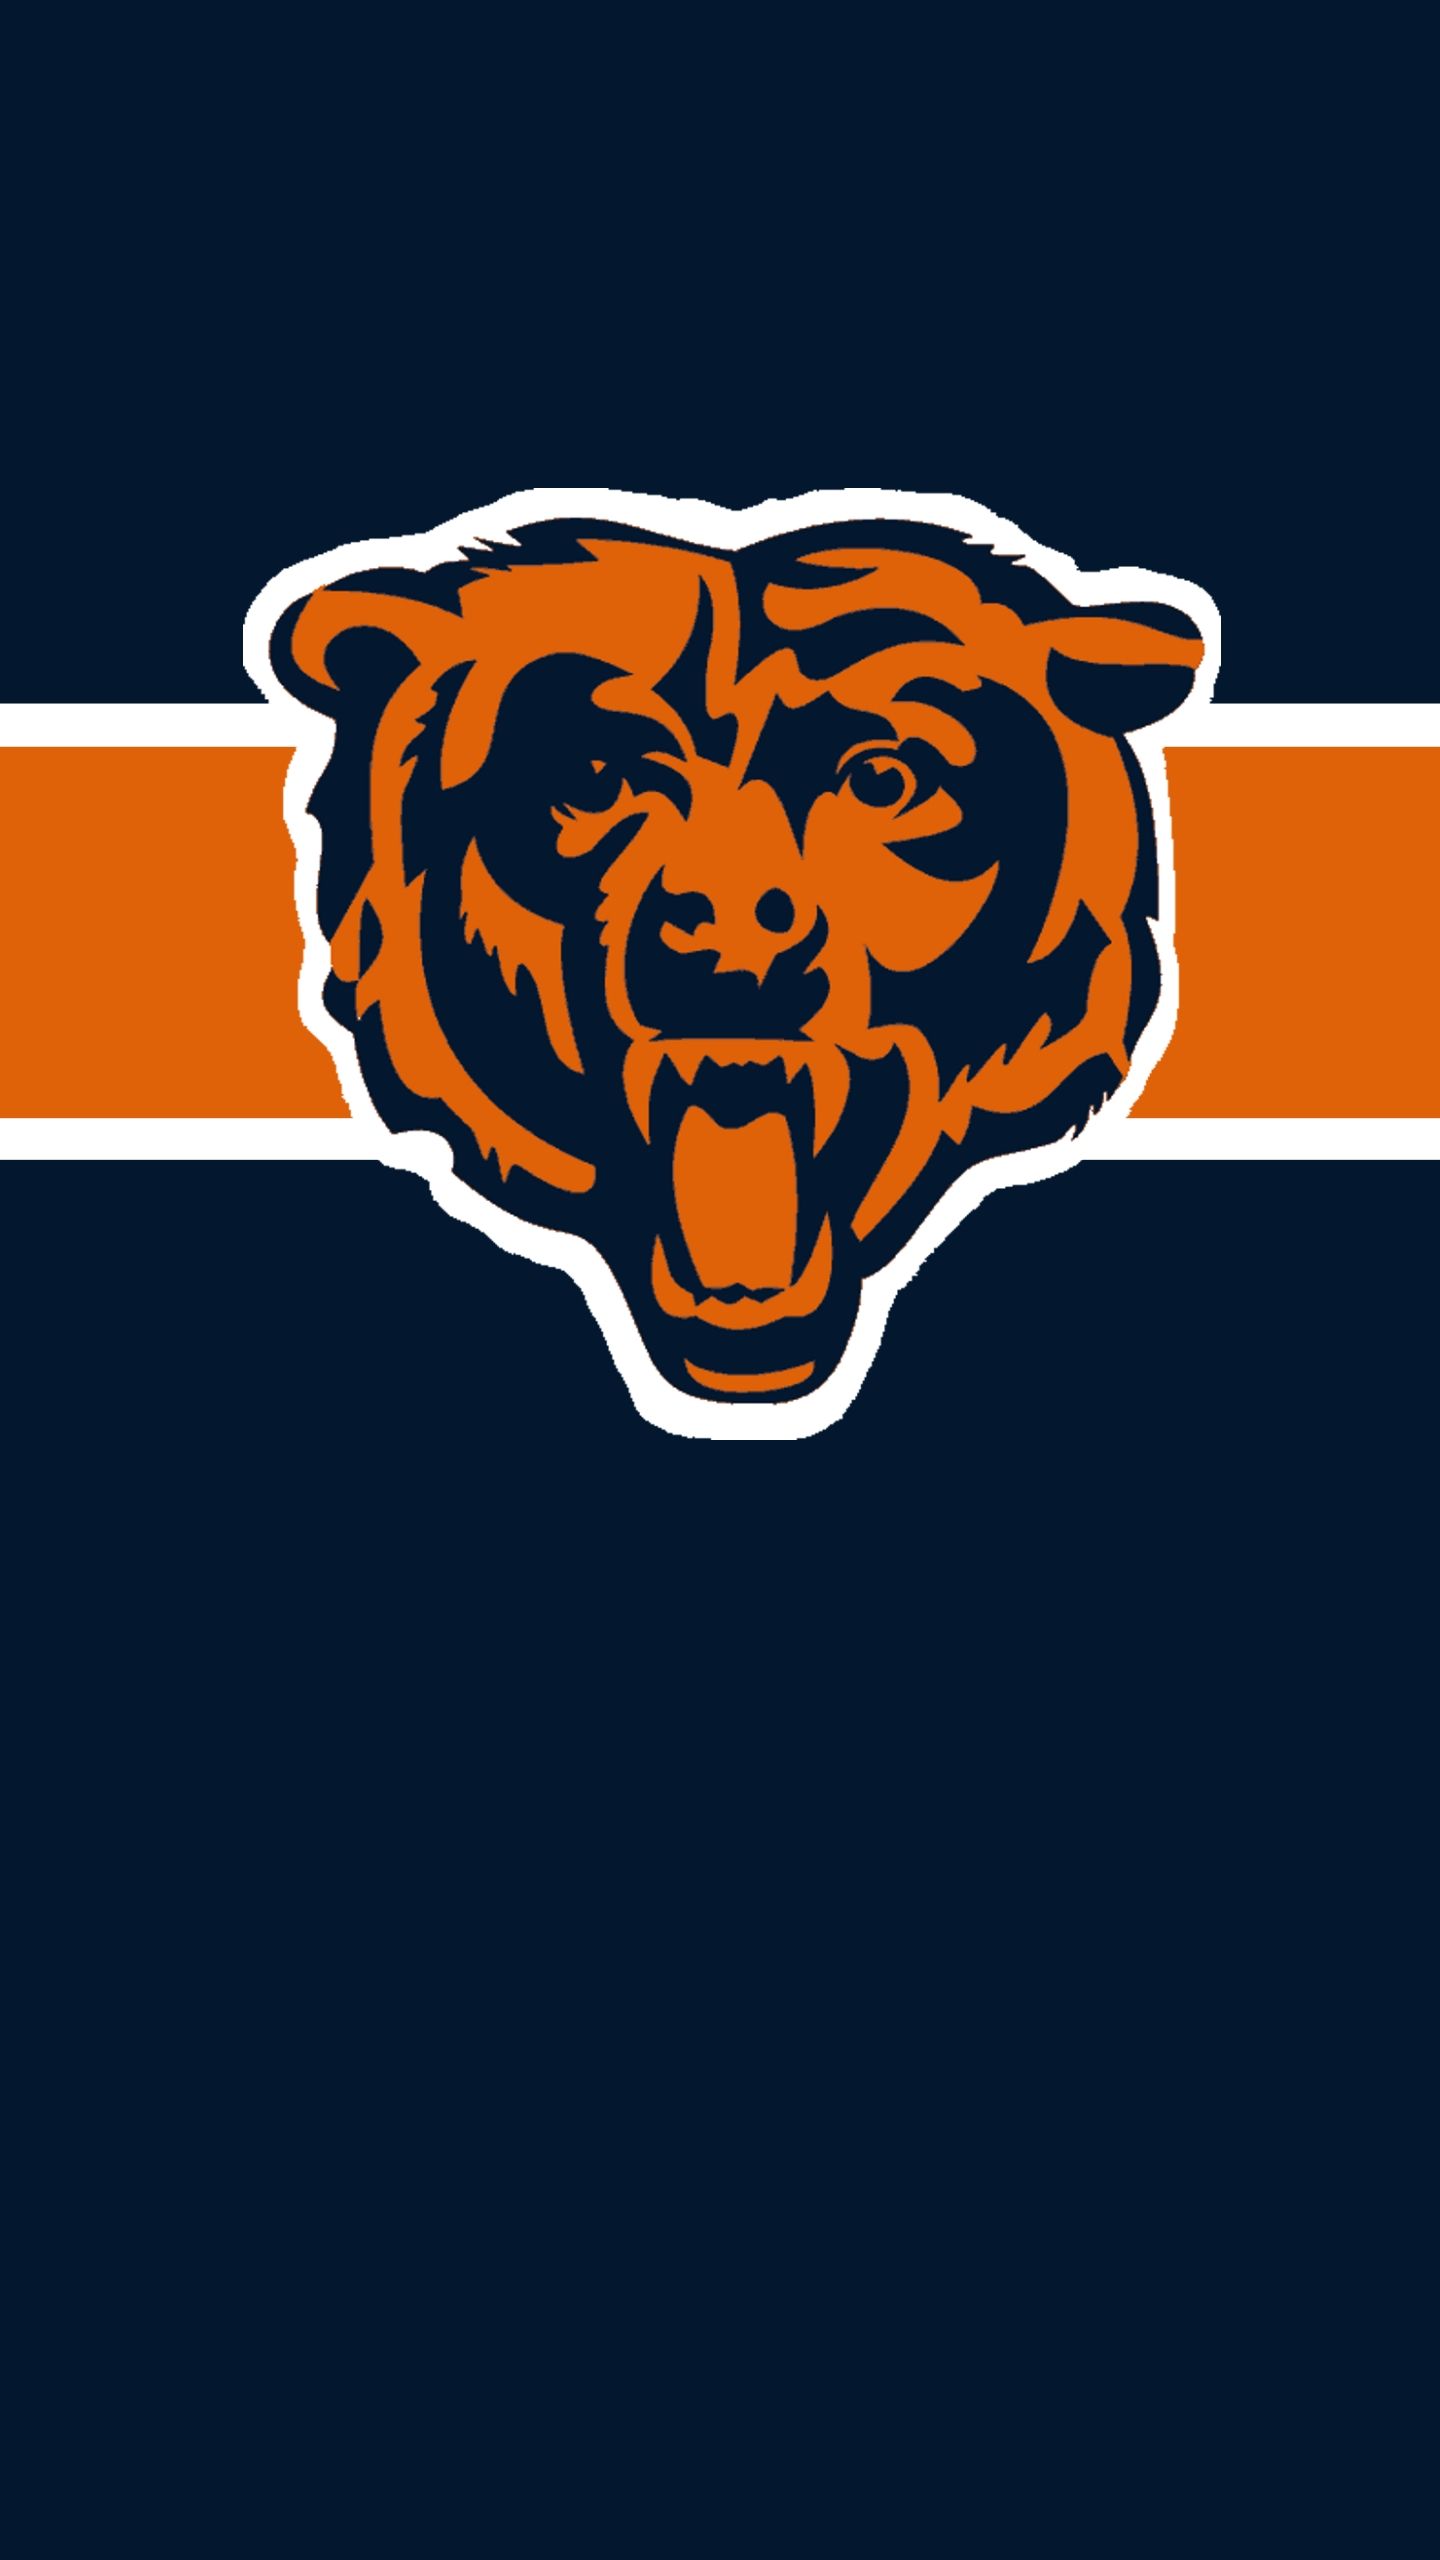 Most popular free chicago bears wallpapers full hd ã for pc desktop chicago bears wallpaper chicago bears logo chicago bears jersey